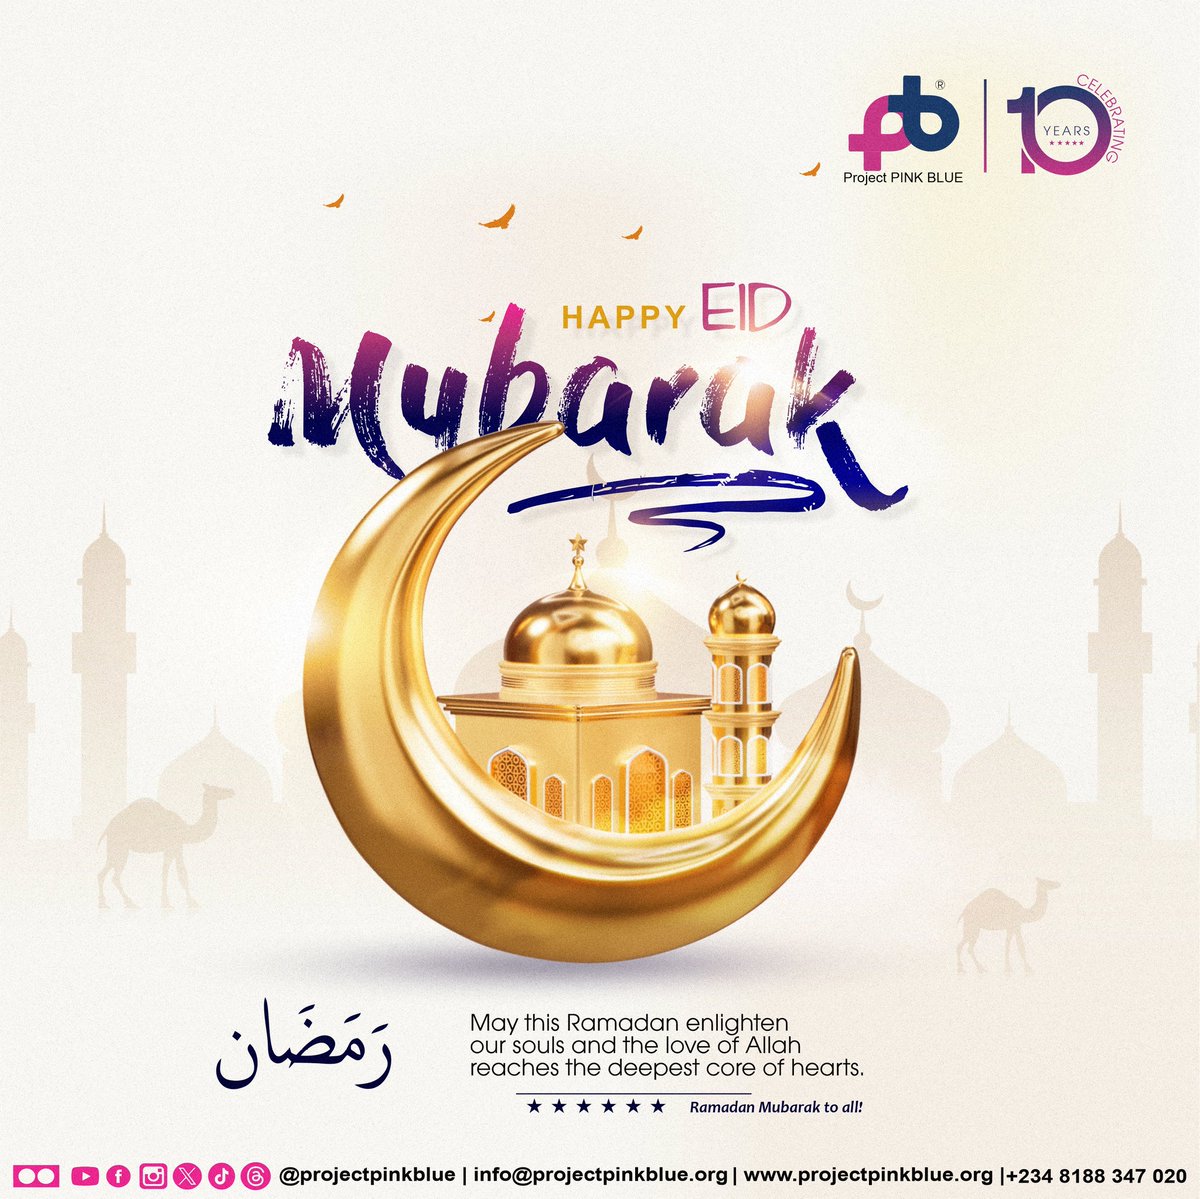 To all our Muslim brothers and sisters; may the peace and joy of the Ramadan illuminate your life today and beyond. From all of us at Project PINK BLUE, we wish you a joyous EID MUBARAK 🎊🎊 #EidMubarak #projectpinkblue #Eidmubarak2024